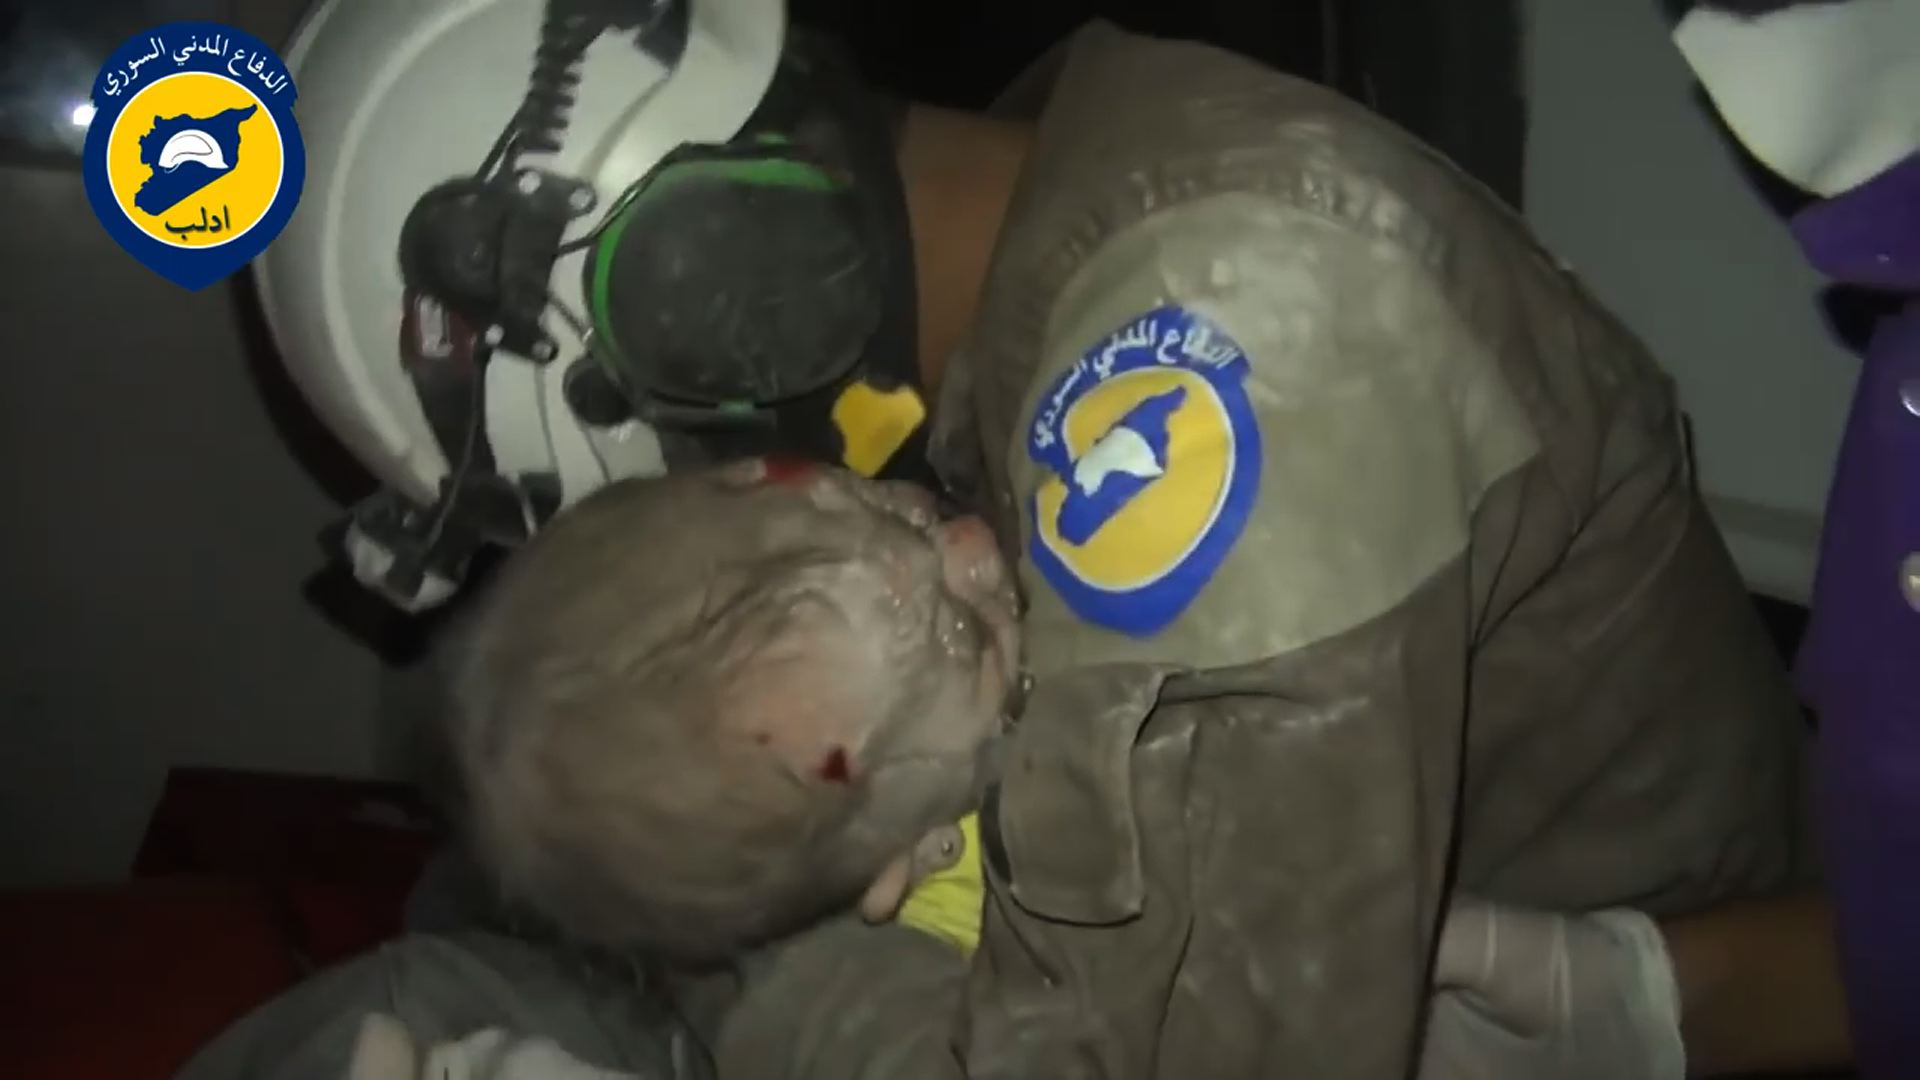 A handout picture released by the Syrian civil defence in Idlib shows an unidentified volunteer cradling four-month-old Wahida after she was rescued from under the rubble of a building following a reported air strike on the rebel-held northwestern city of Idlib on September 29, 2016. / AFP PHOTO / IDLIB CIVIL DEFENCE / HO / === RESTRICTED TO EDITORIAL USE - MANDATORY CREDIT "AFP PHOTO / HO / IDLIB CIVIL DEFENCE" - NO MARKETING NO ADVERTISING CAMPAIGNS - DISTRIBUTED AS A SERVICE TO CLIENTS ===